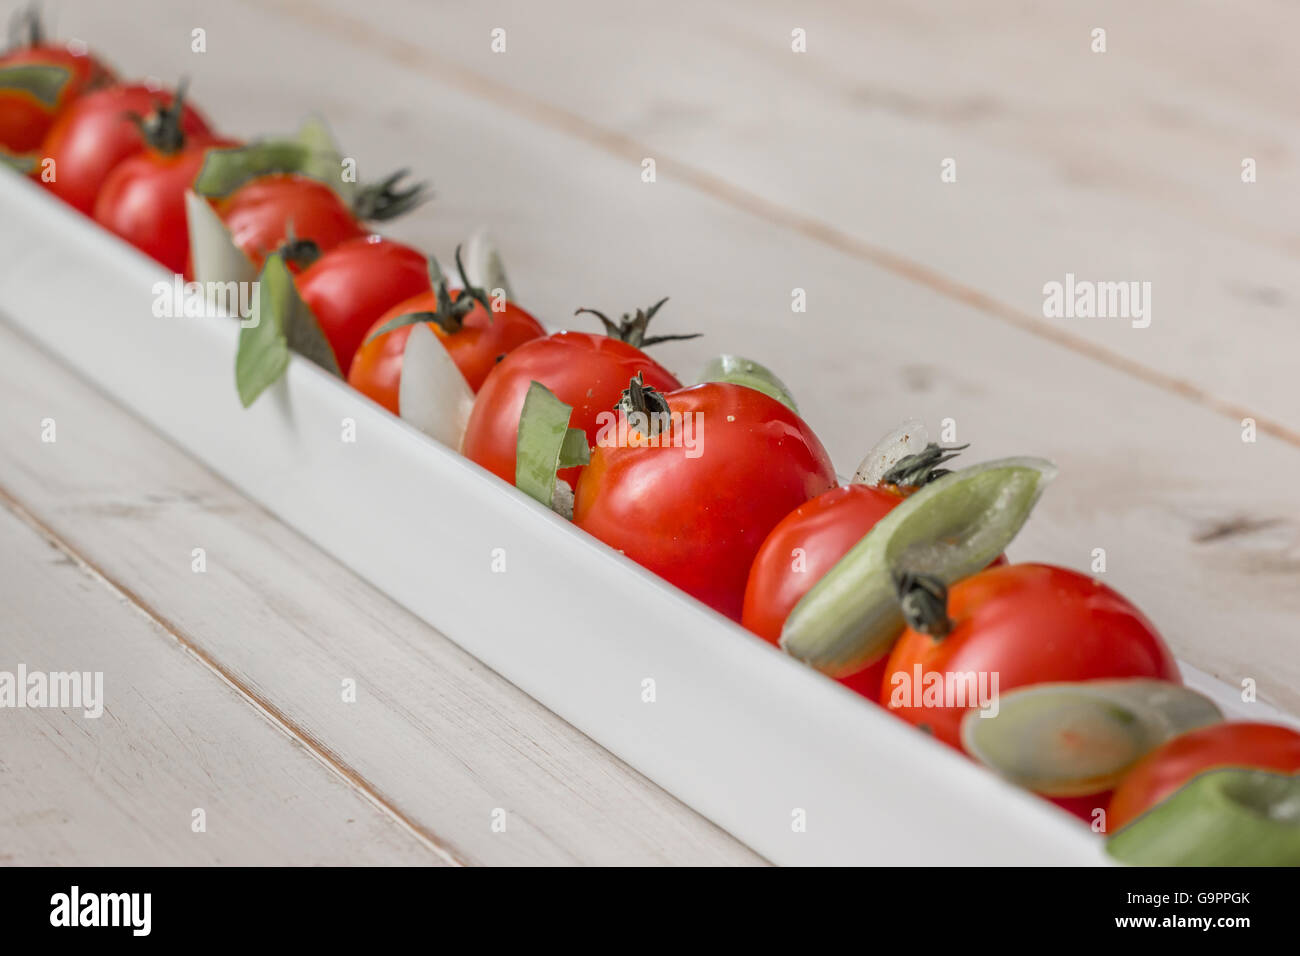 White elongated dish filled with cherry tomatoes, spring onions and pepper Stock Photo